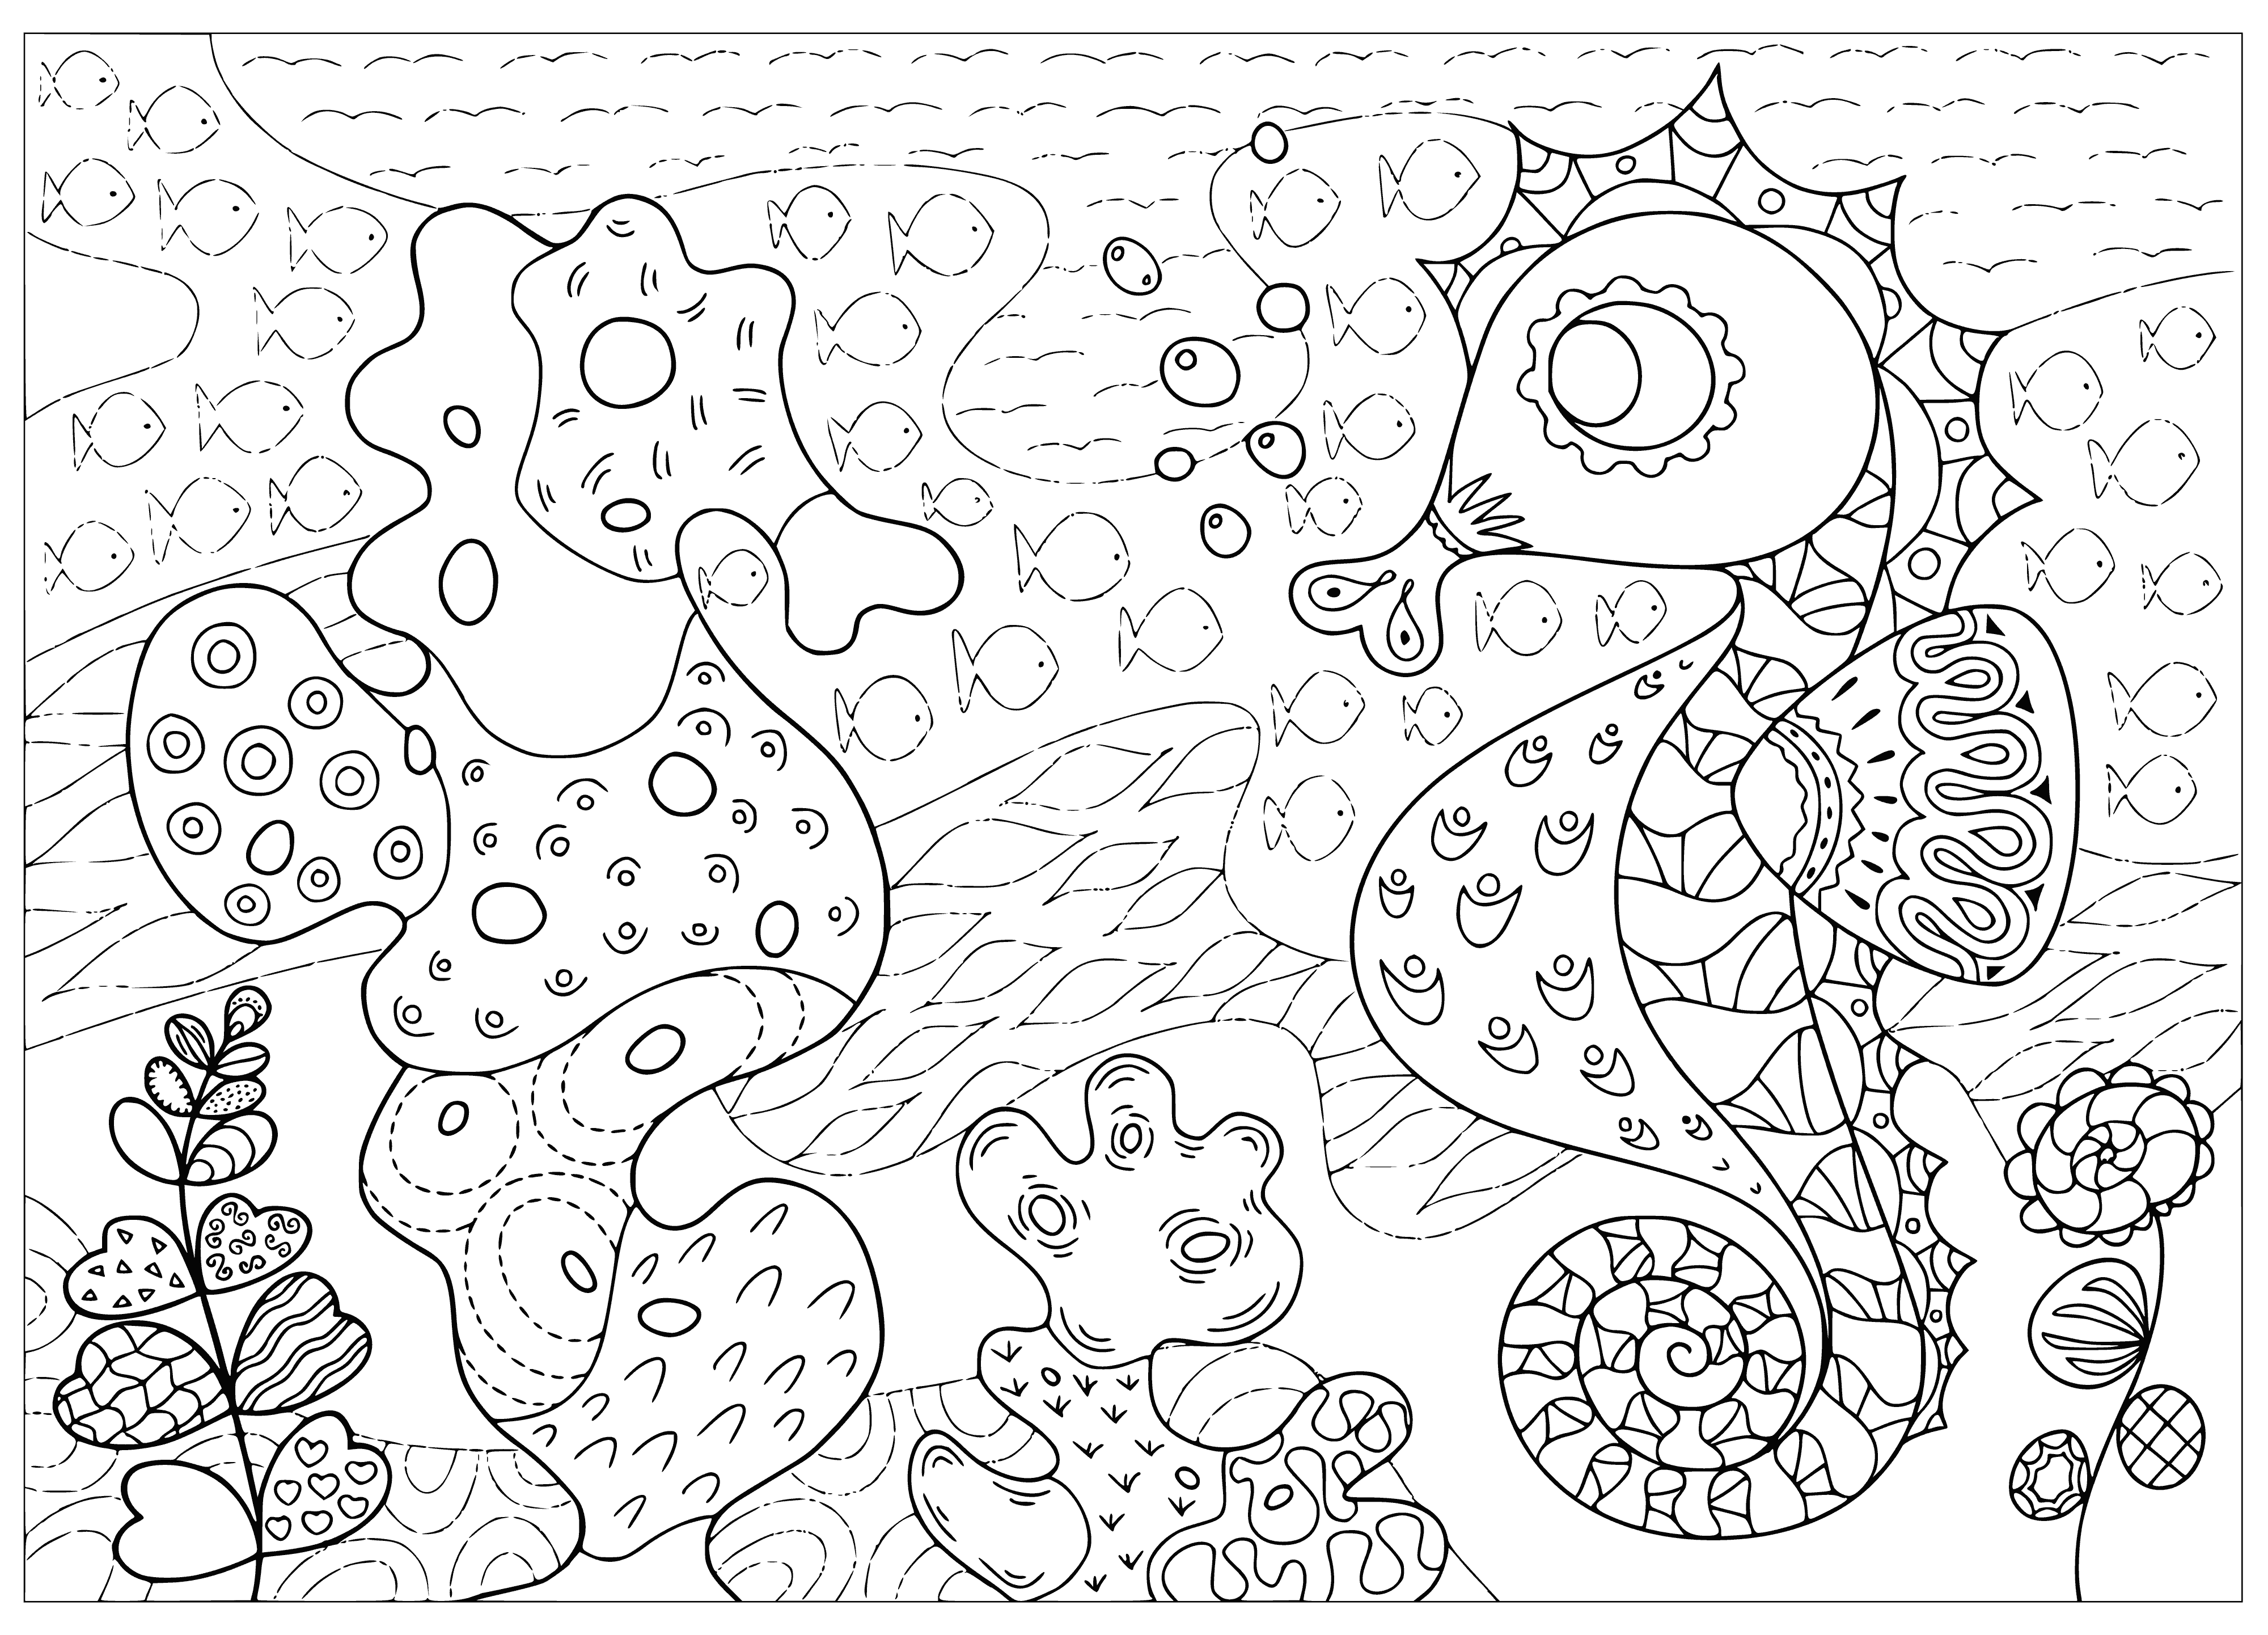 coloring page: Seahorse winds its tail around coral in a peaceful, colorful scene - a calming coloring page.